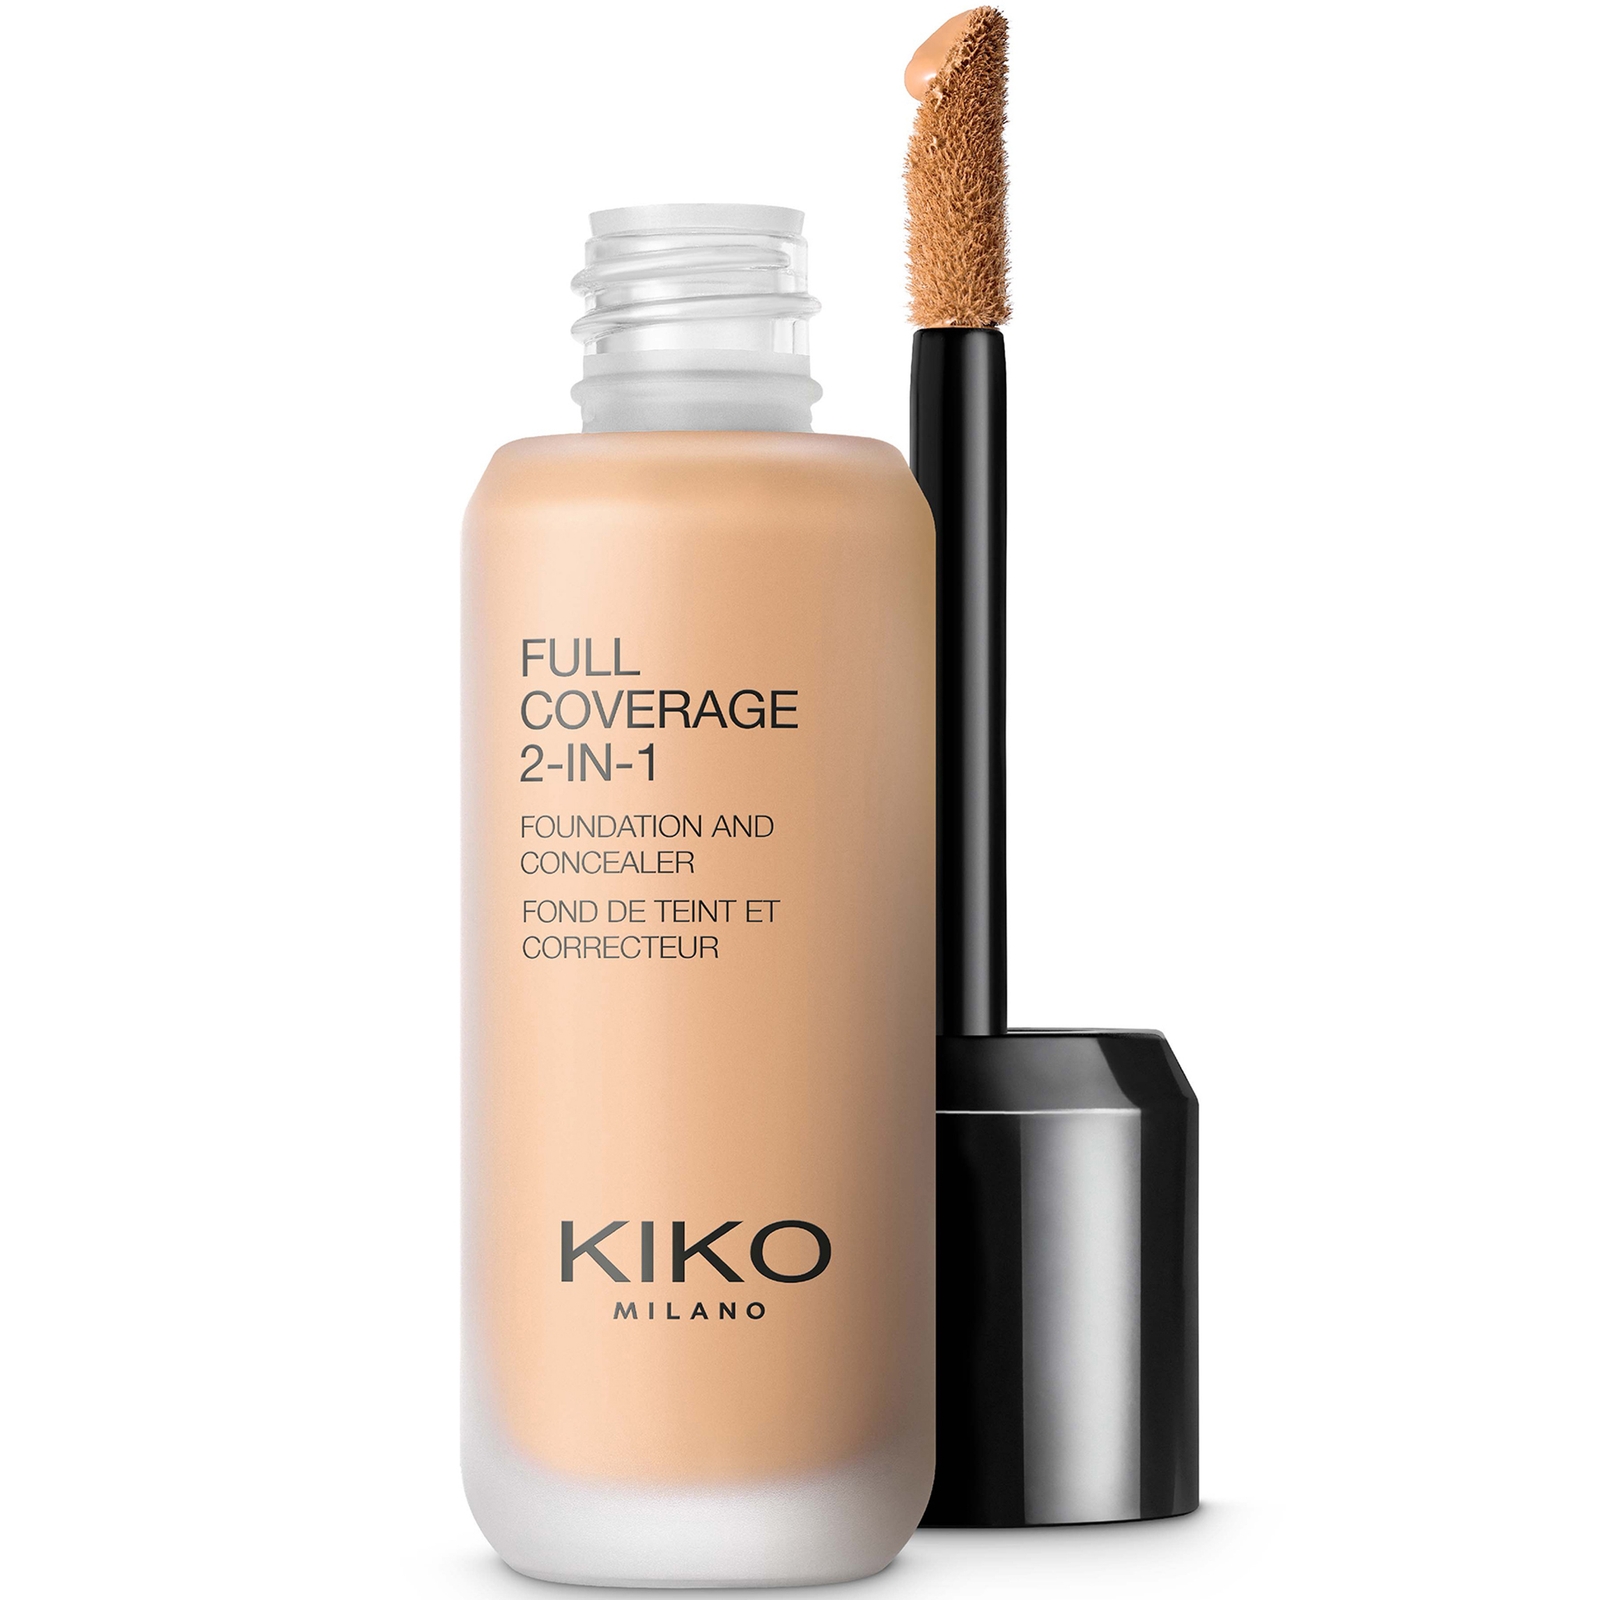 KIKO Milano Full Coverage 2-in-1 Foundation and Concealer 25ml (Various Shades) - 40 Warm Beige